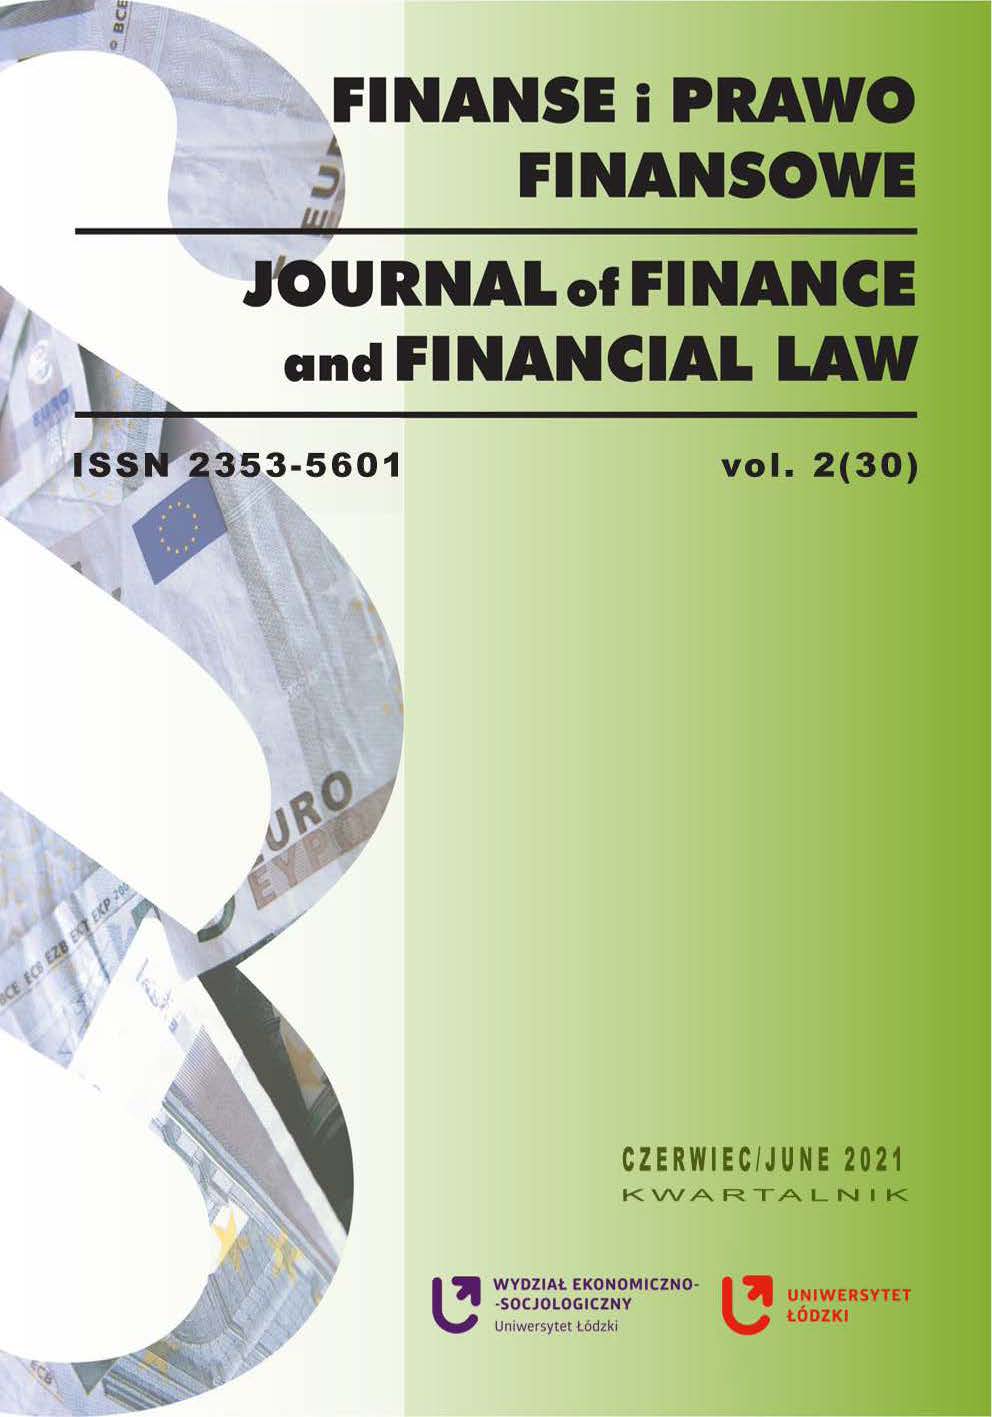 Evaluation of the Level of Financial Inclusion among Businesses from the Next 11 Group of Countries